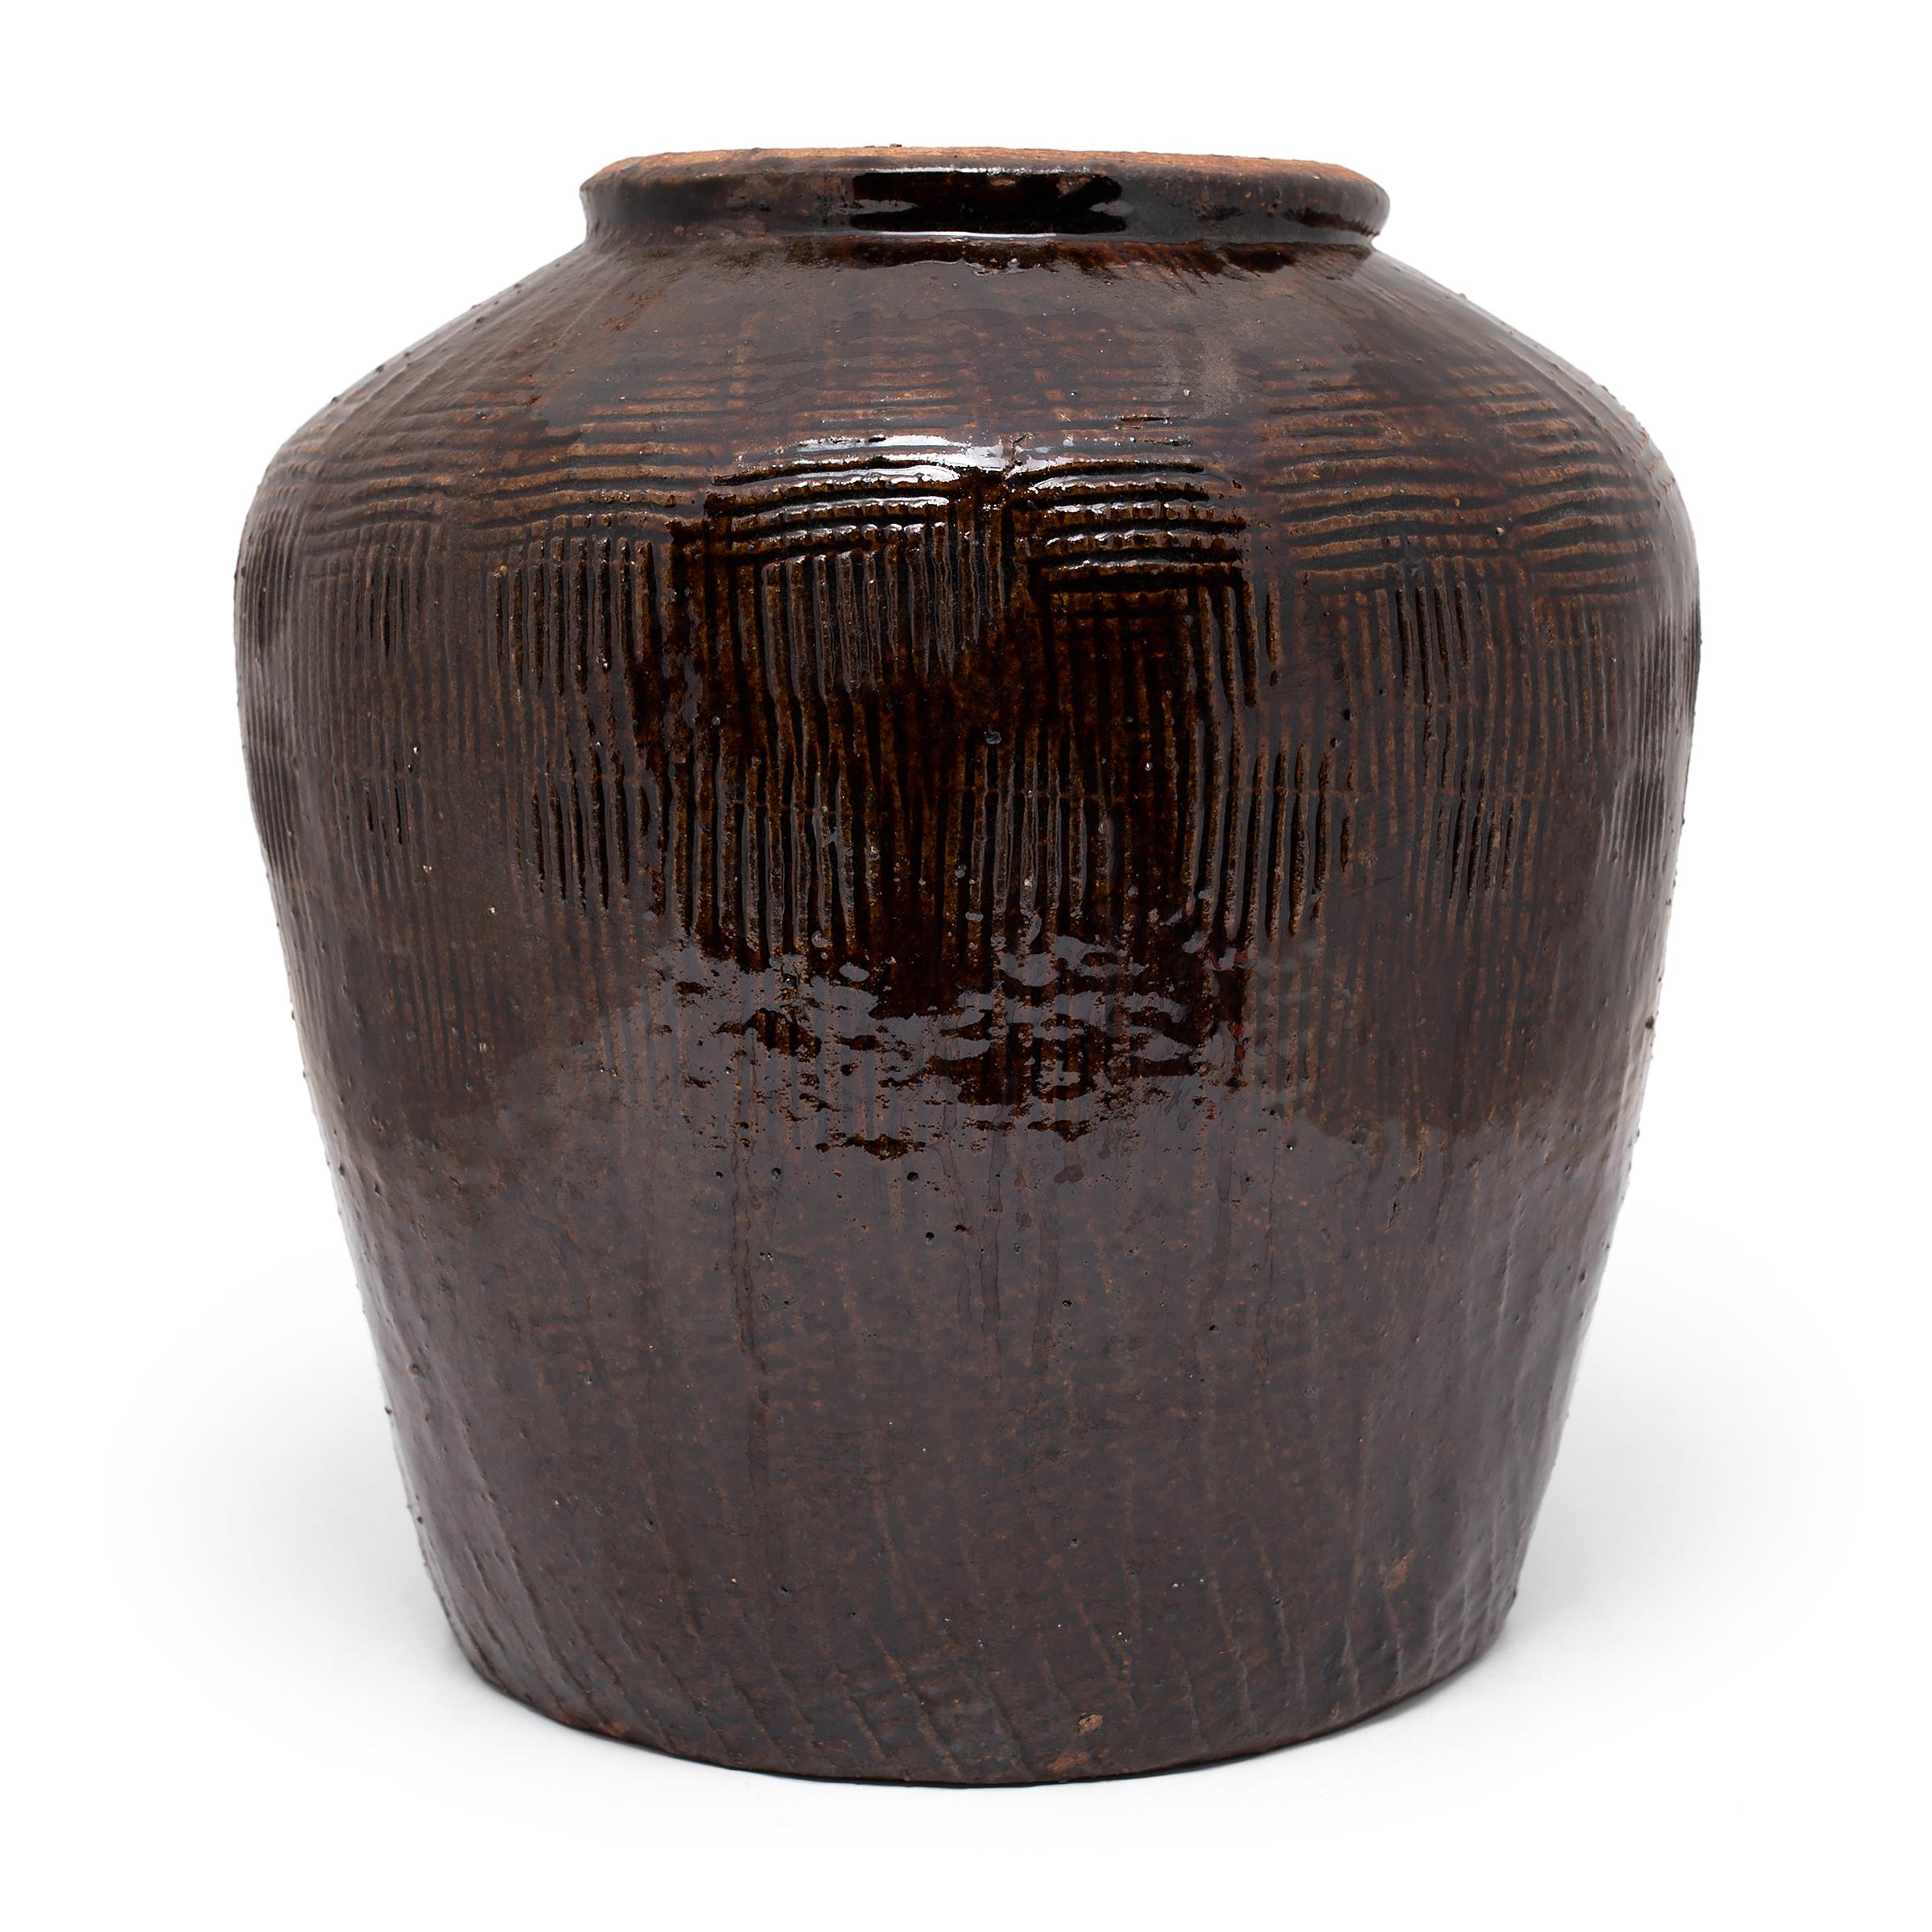 Originally used for fermenting foods and condiments in a provincial Chinese kitchen, this 19th century terracotta jar is coated inside and out with a rich, dark brown glaze. The jar has a slightly tapered form with a wide base, high shoulders, and a